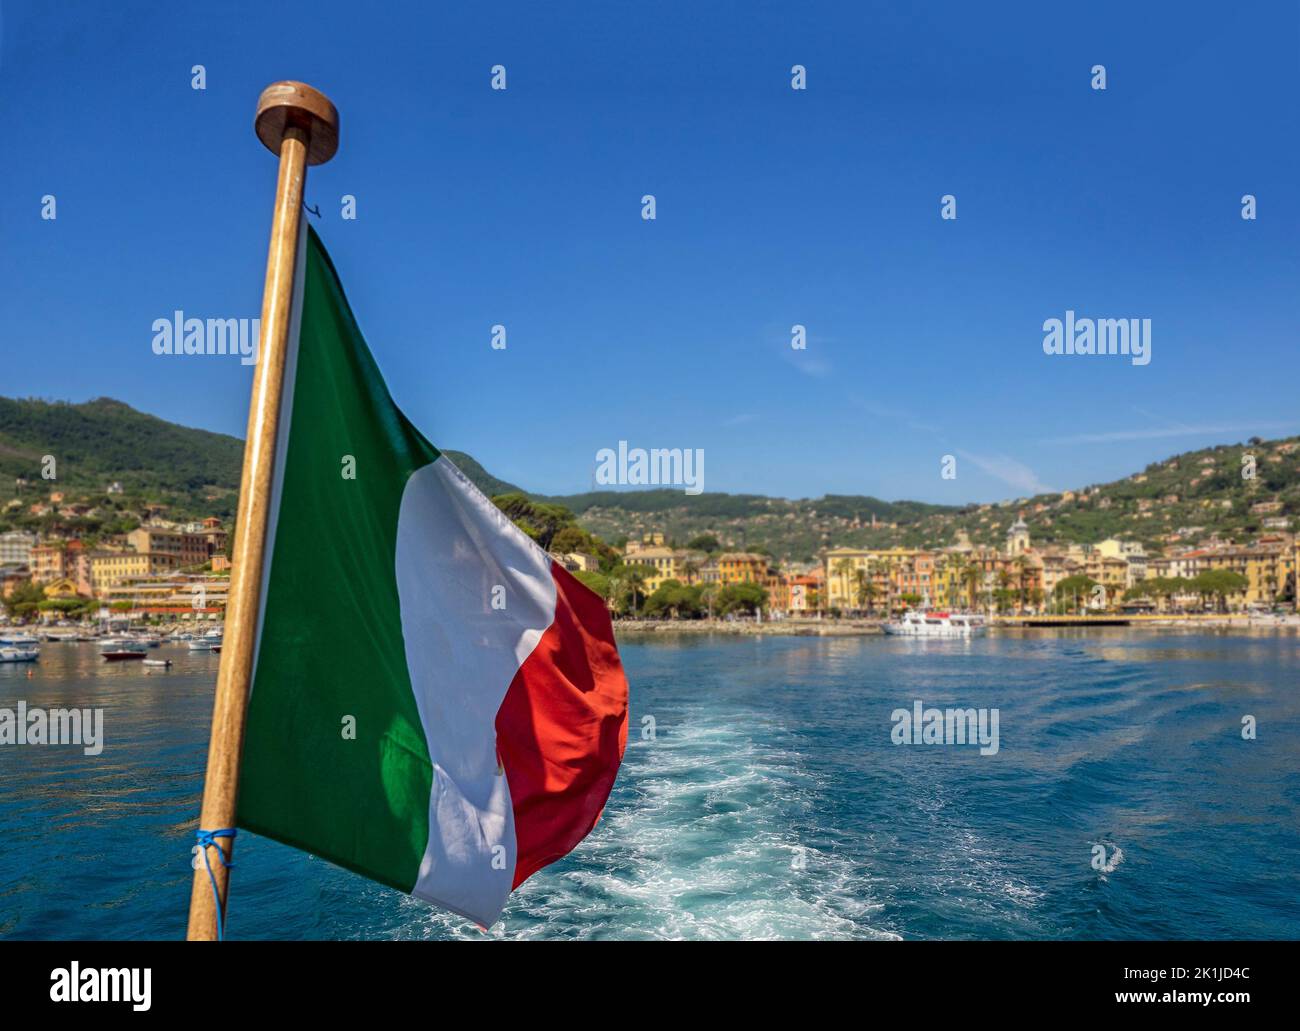 Italian Flag on rear of boat with the Mediterranean coast in the background - for use as a background Stock Photo